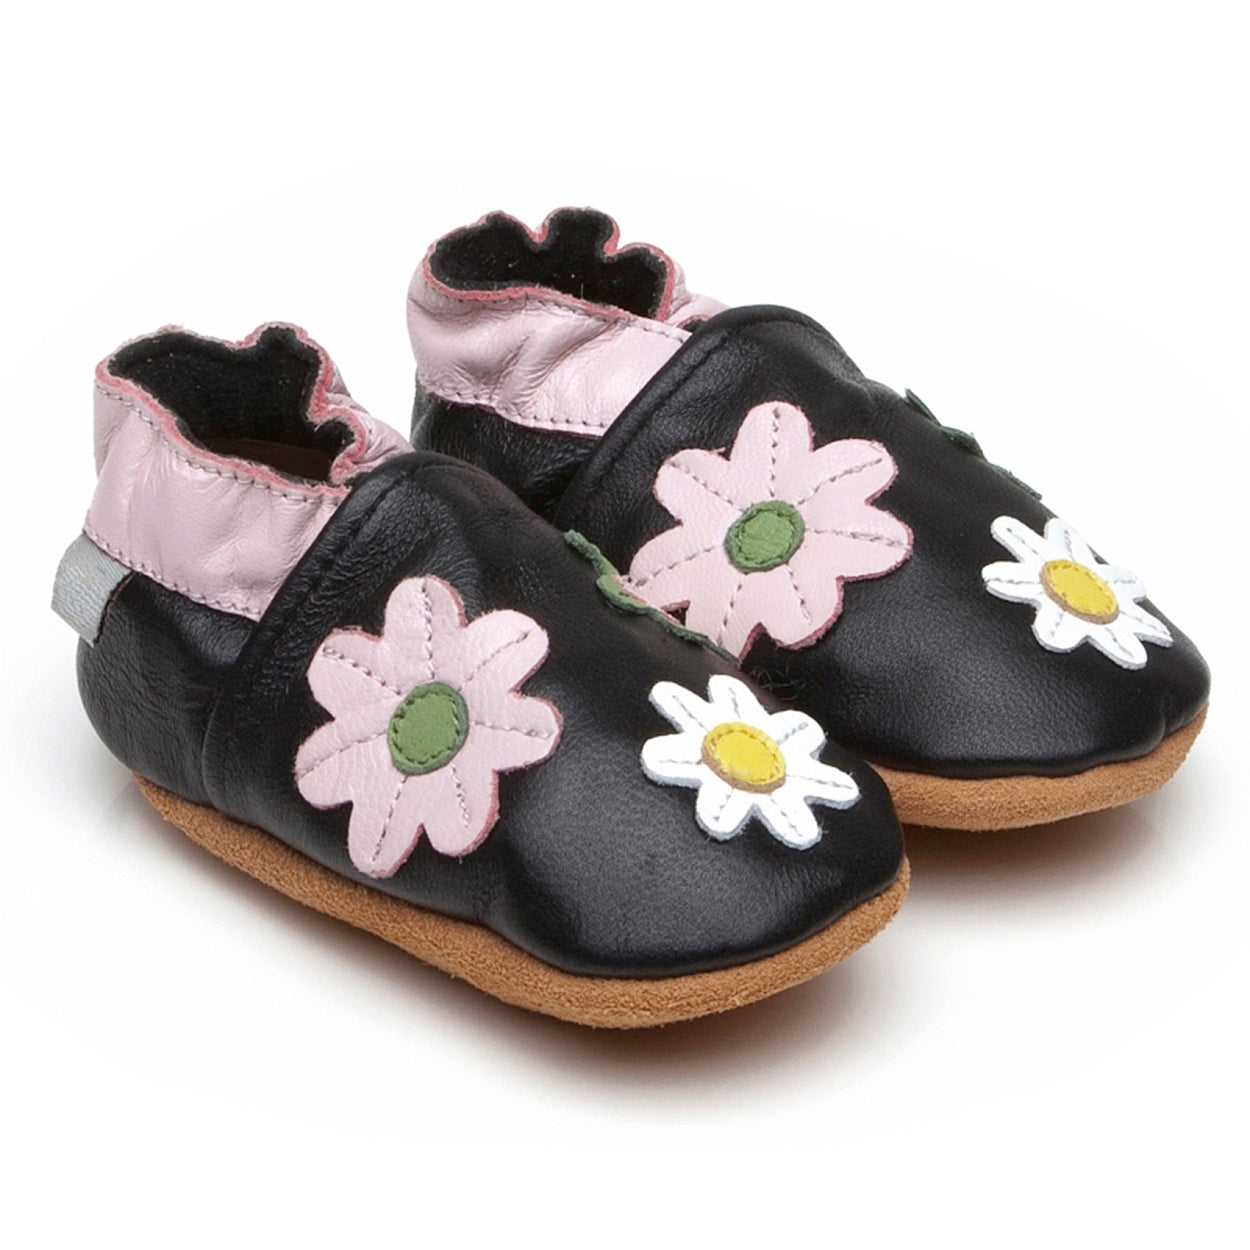 Soft Leather Baby Shoes Little Flowers Black